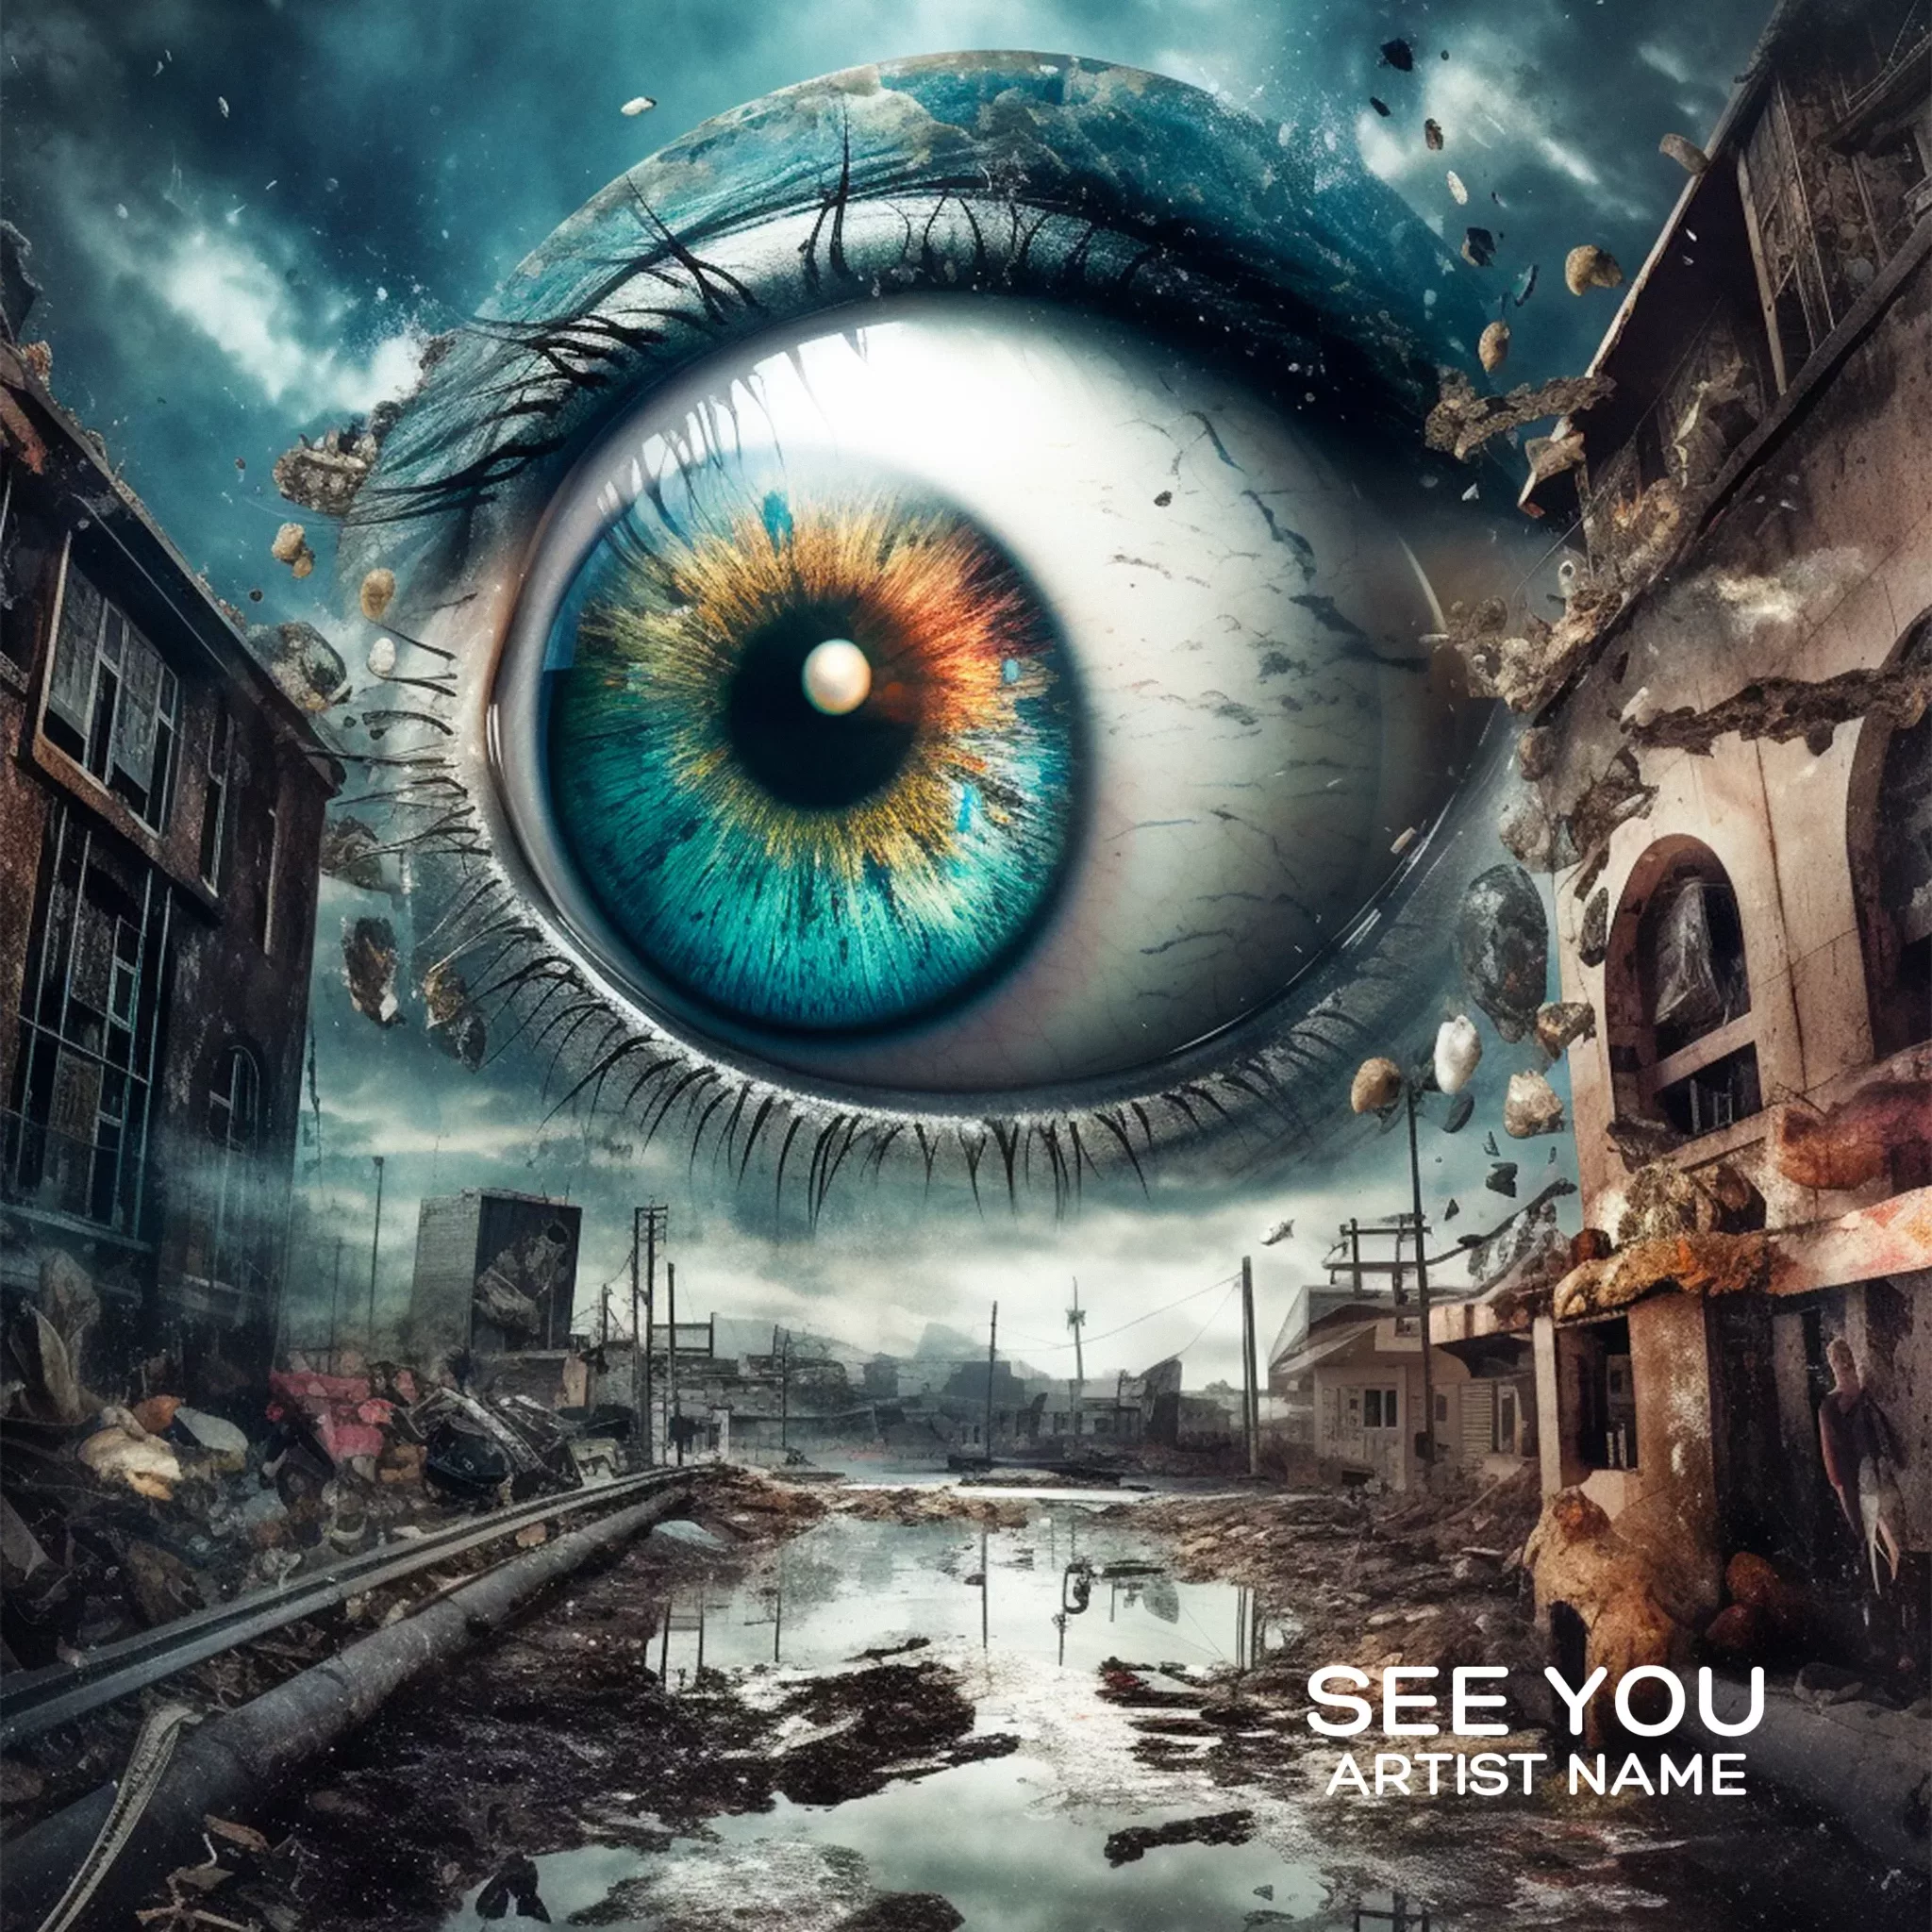 See you cover art for sale